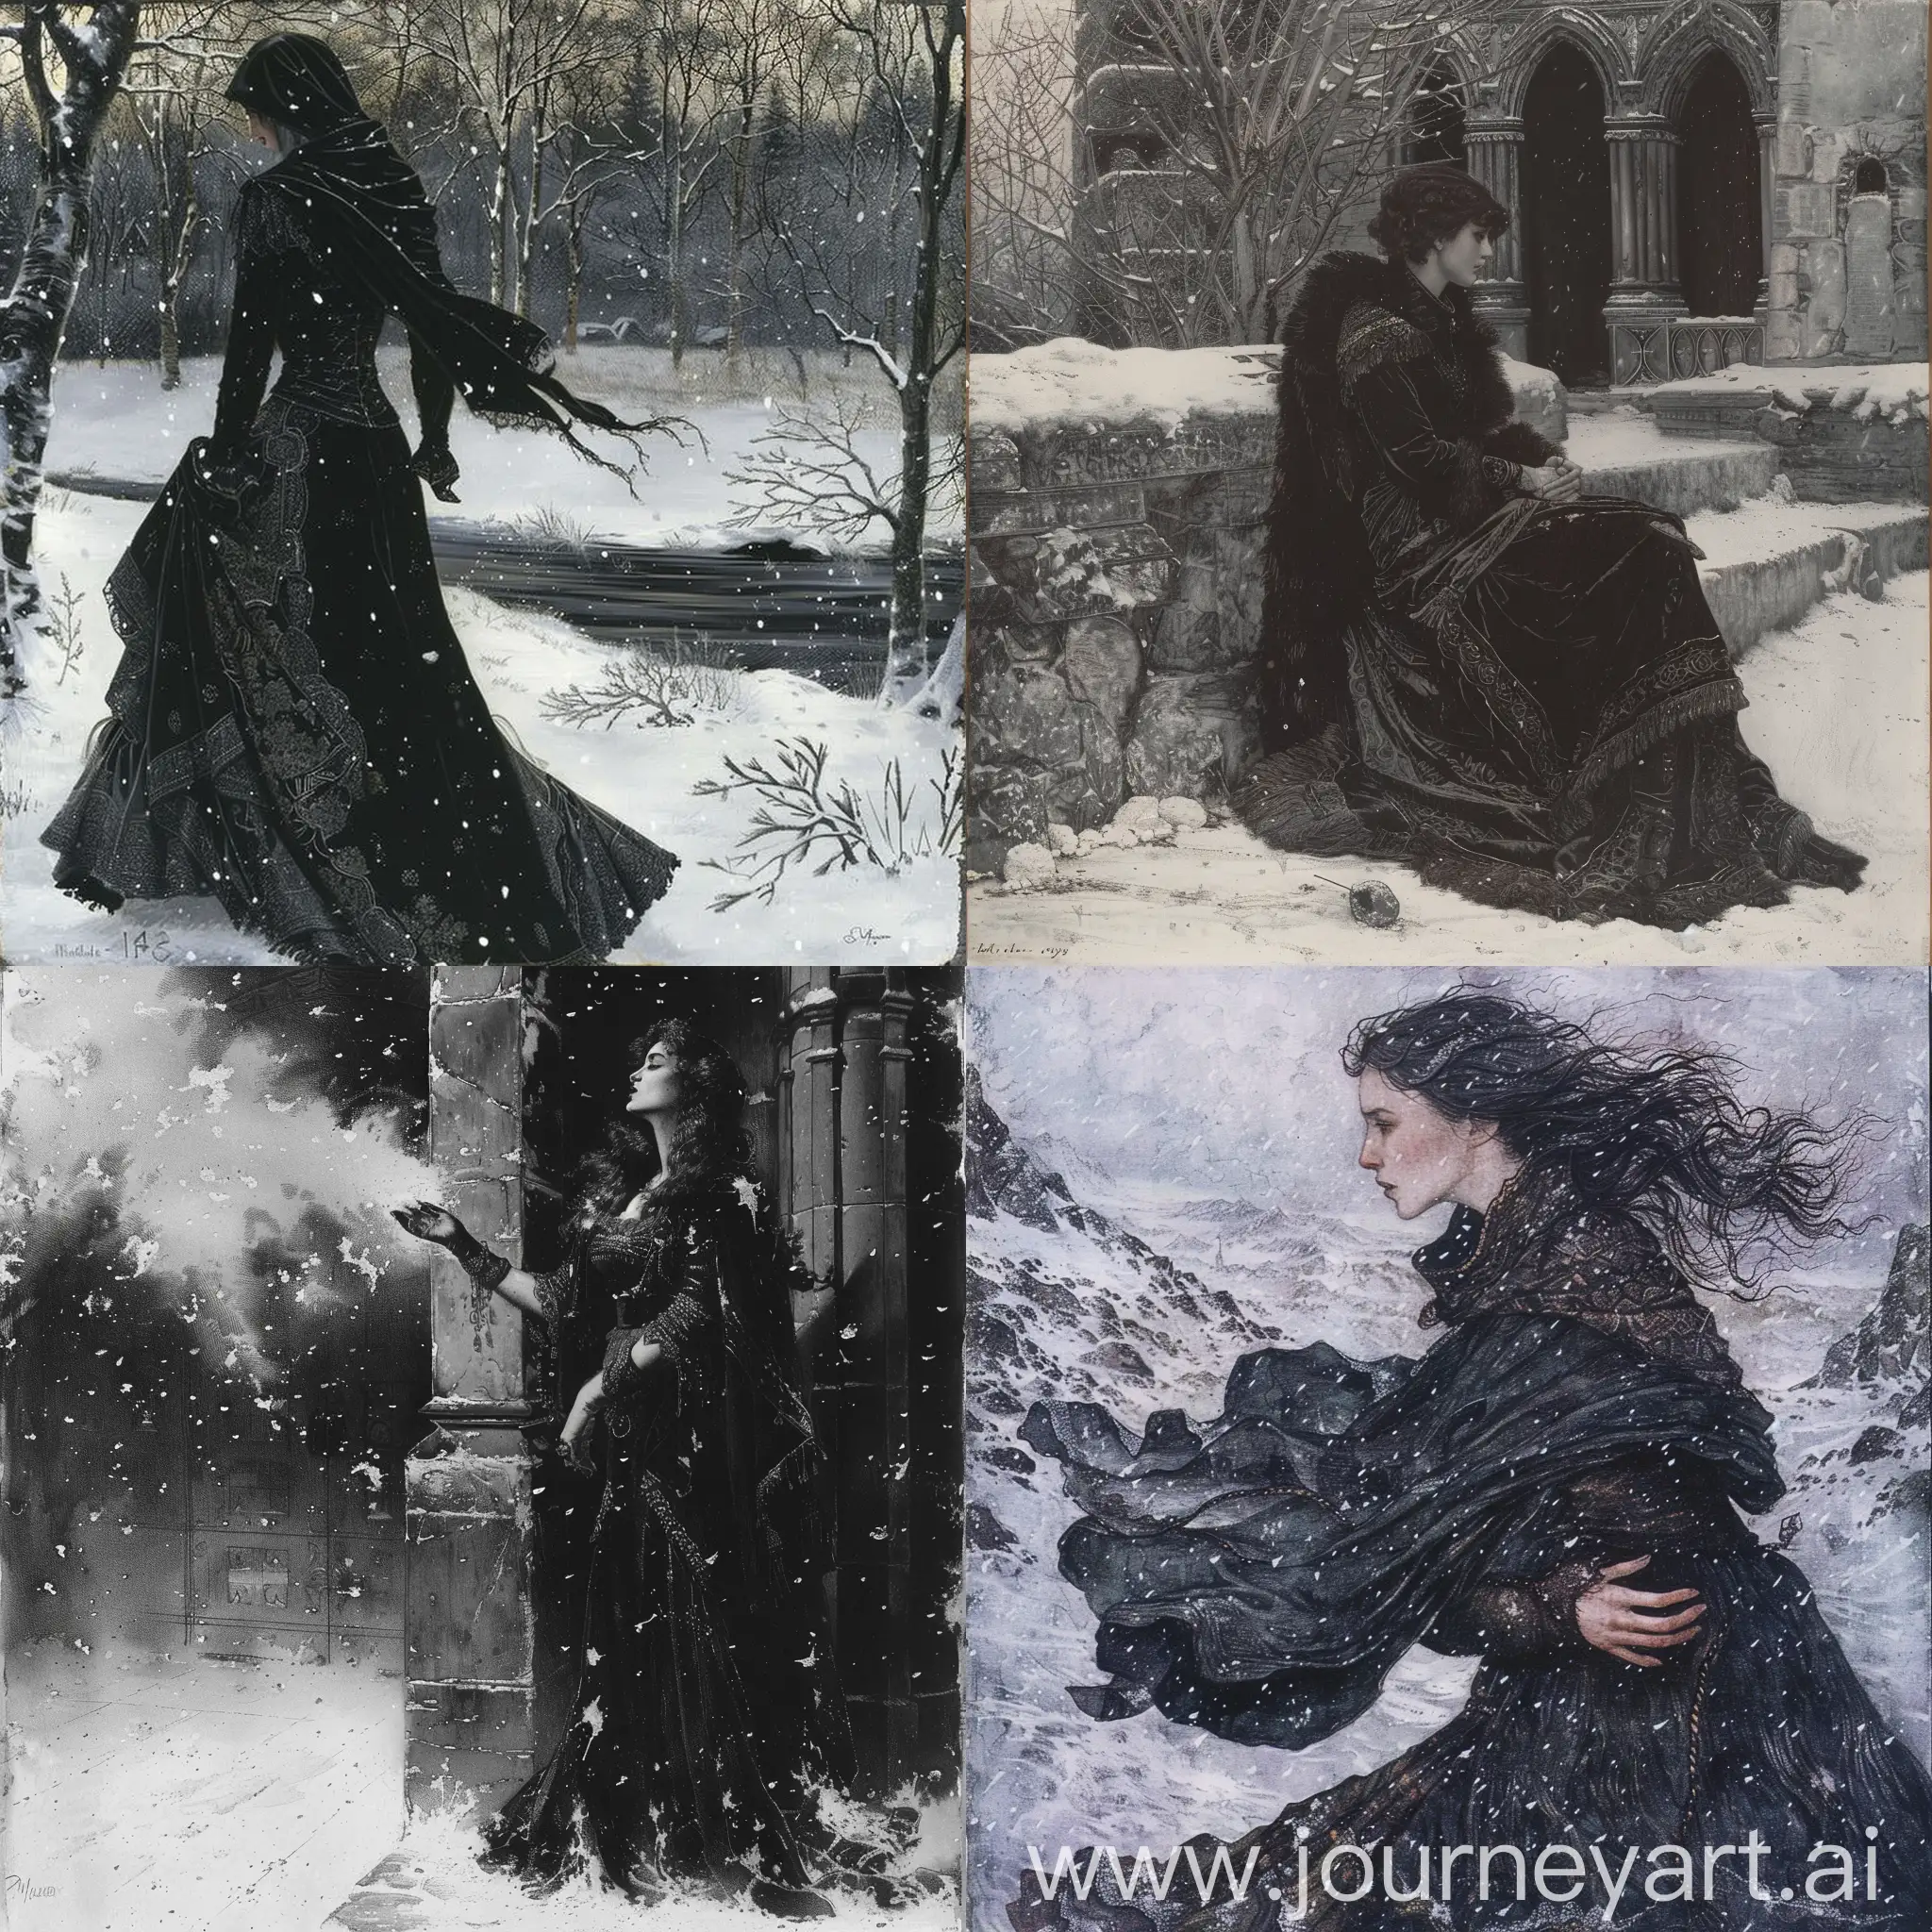 Mistress of palaces, oh, muse of bitter lines!
When a blizzard sweeps, the longing of the black veya,
When January whistles, letting Boreas off the chain,
Where can I get at least a piece of coal for your chilly feet?